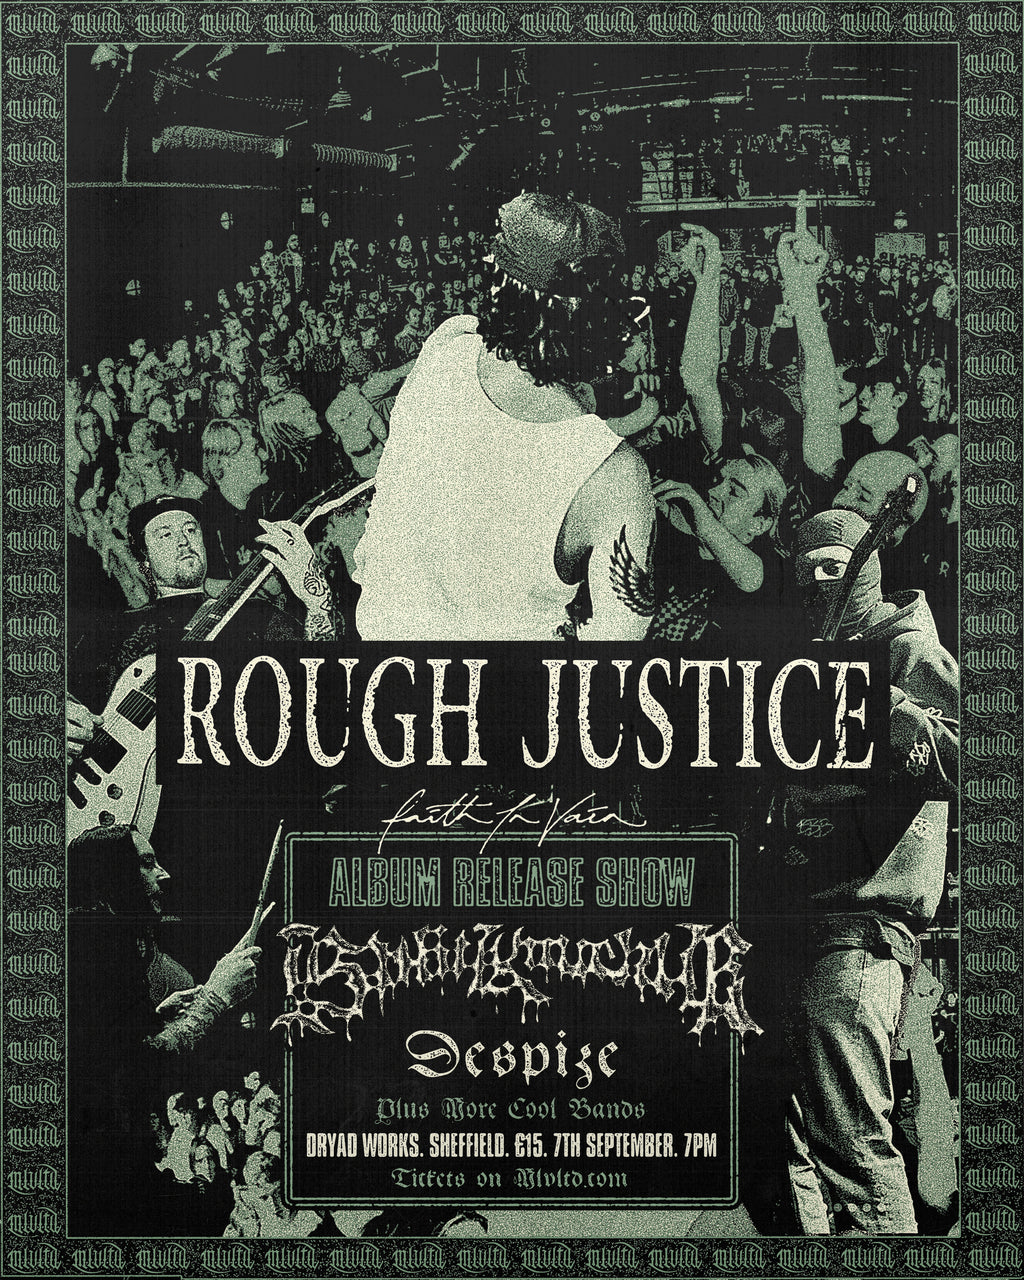 Rough Justice 'Faith In Vain' Release Show Ticket - 7th September